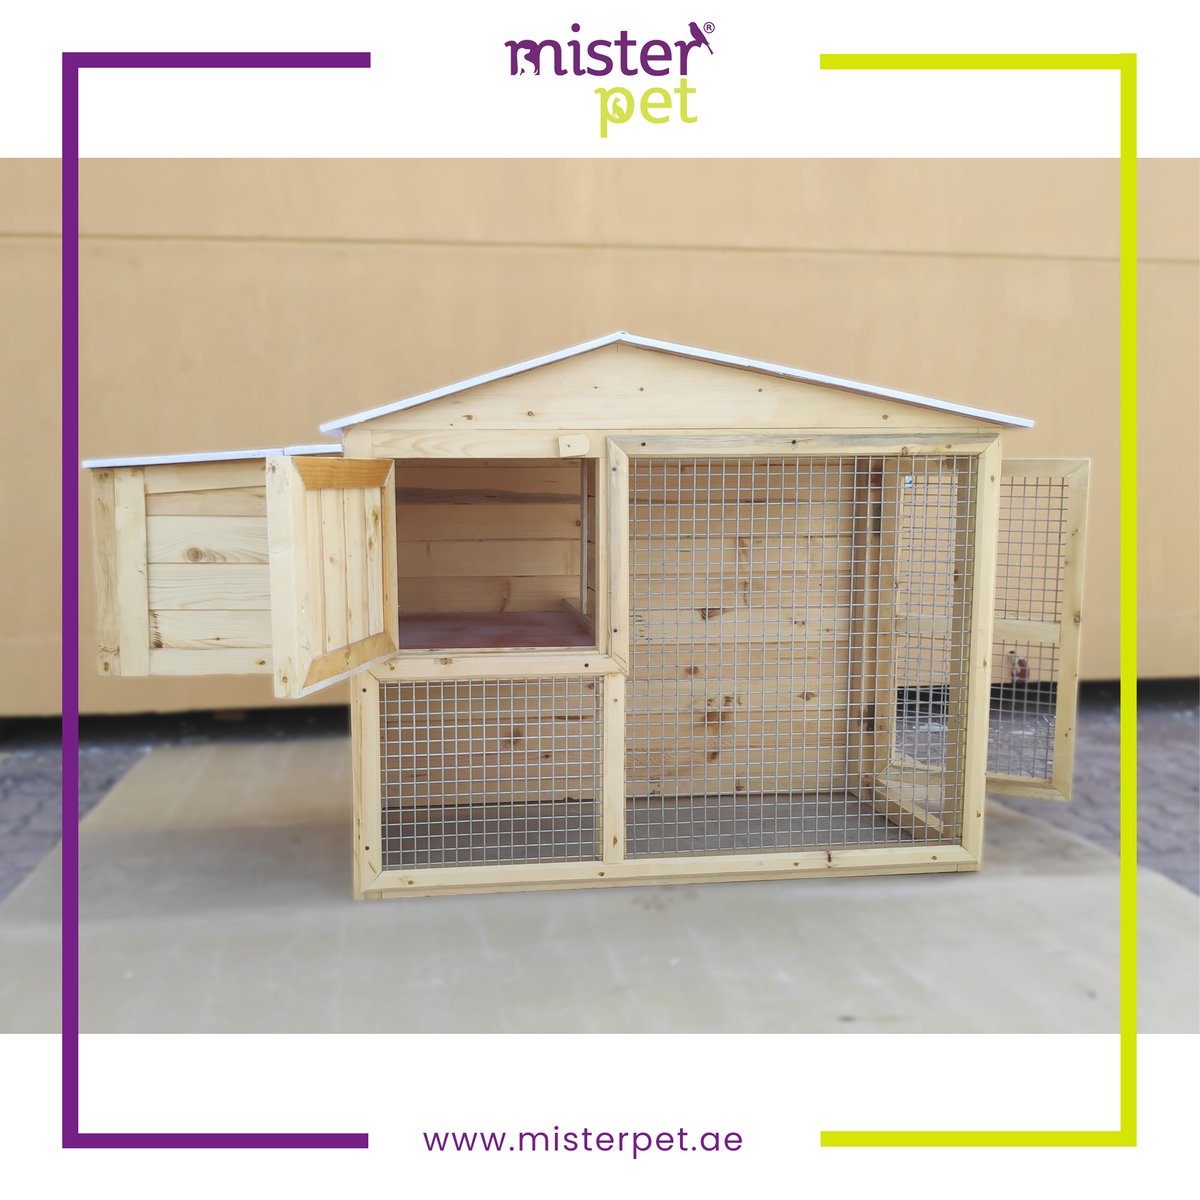 If you're a farm house owner or back yard farmer looking for a great way to raise healthy and happy hens,
You should definitely check out our latest spacious chicken coop with an outdoor run, that's perfect for your needs. 
Place your order today !

#ChickenCoop #MisterPet